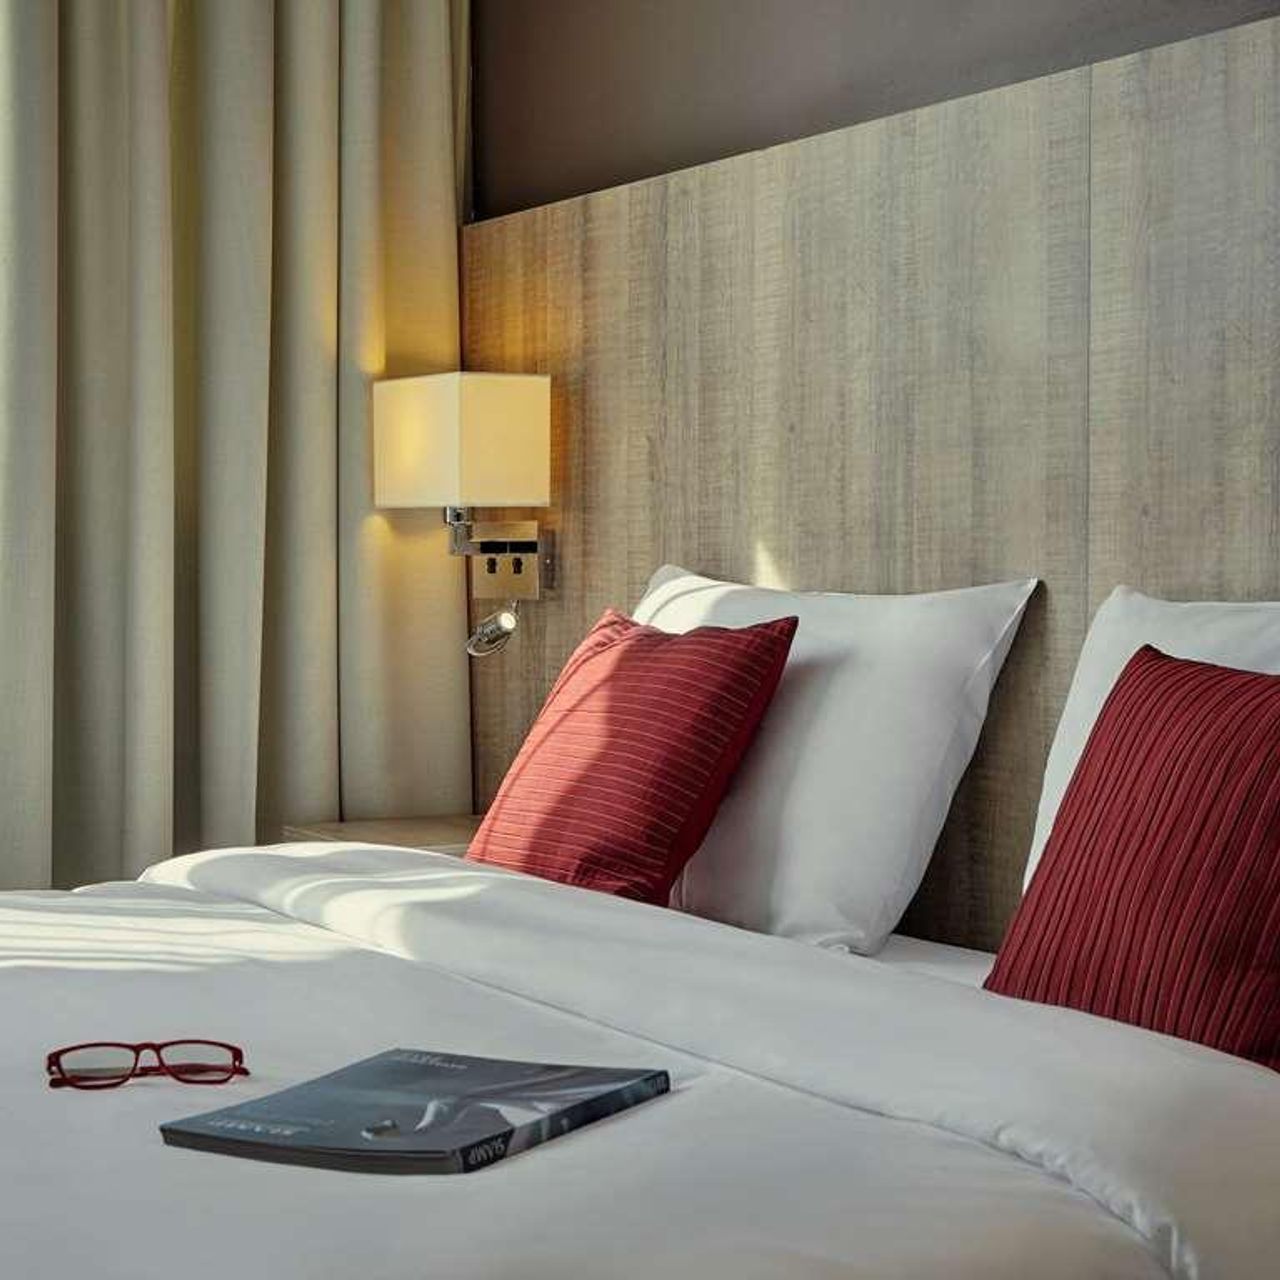 Hôtel Mercure Versailles Parly 2 - Le Chesnay - Great prices at HOTEL INFO